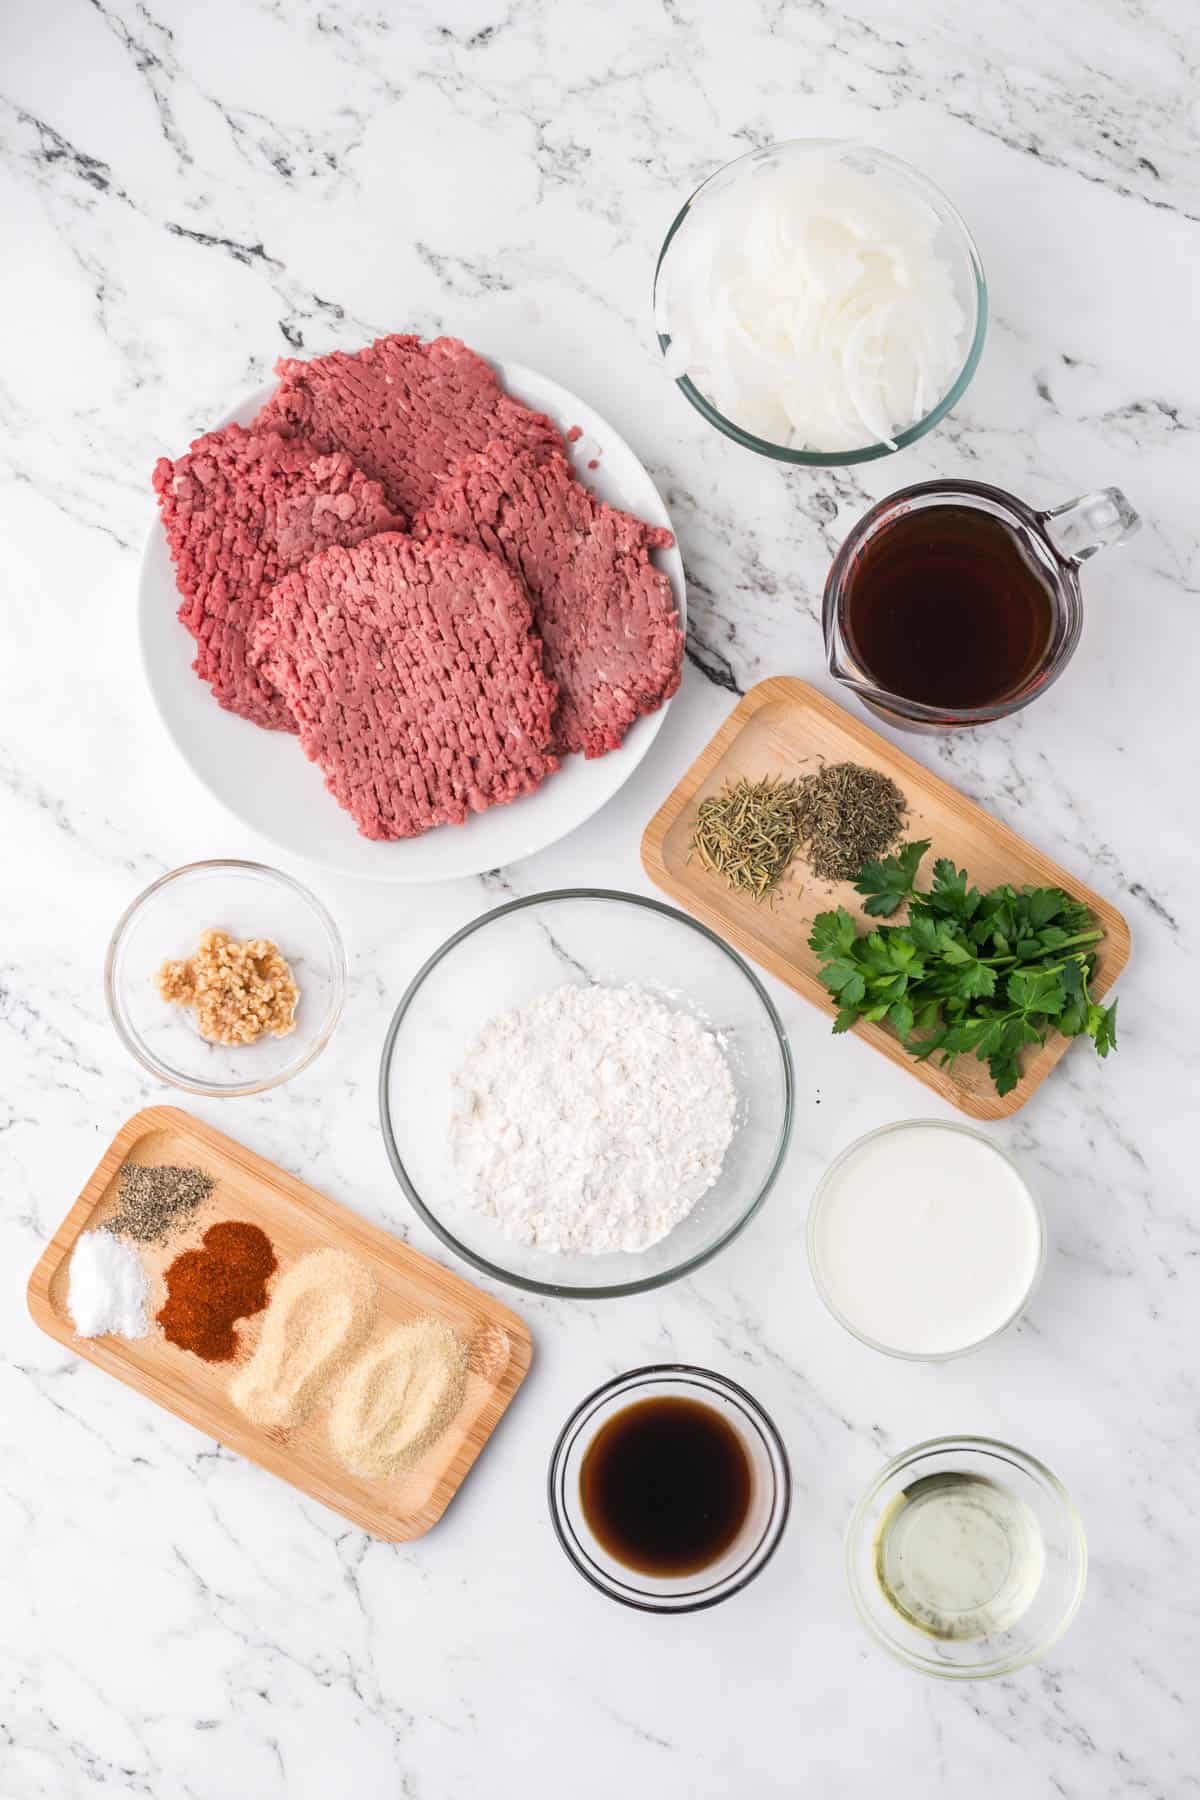 Ingredients for slow cooker cube steak.